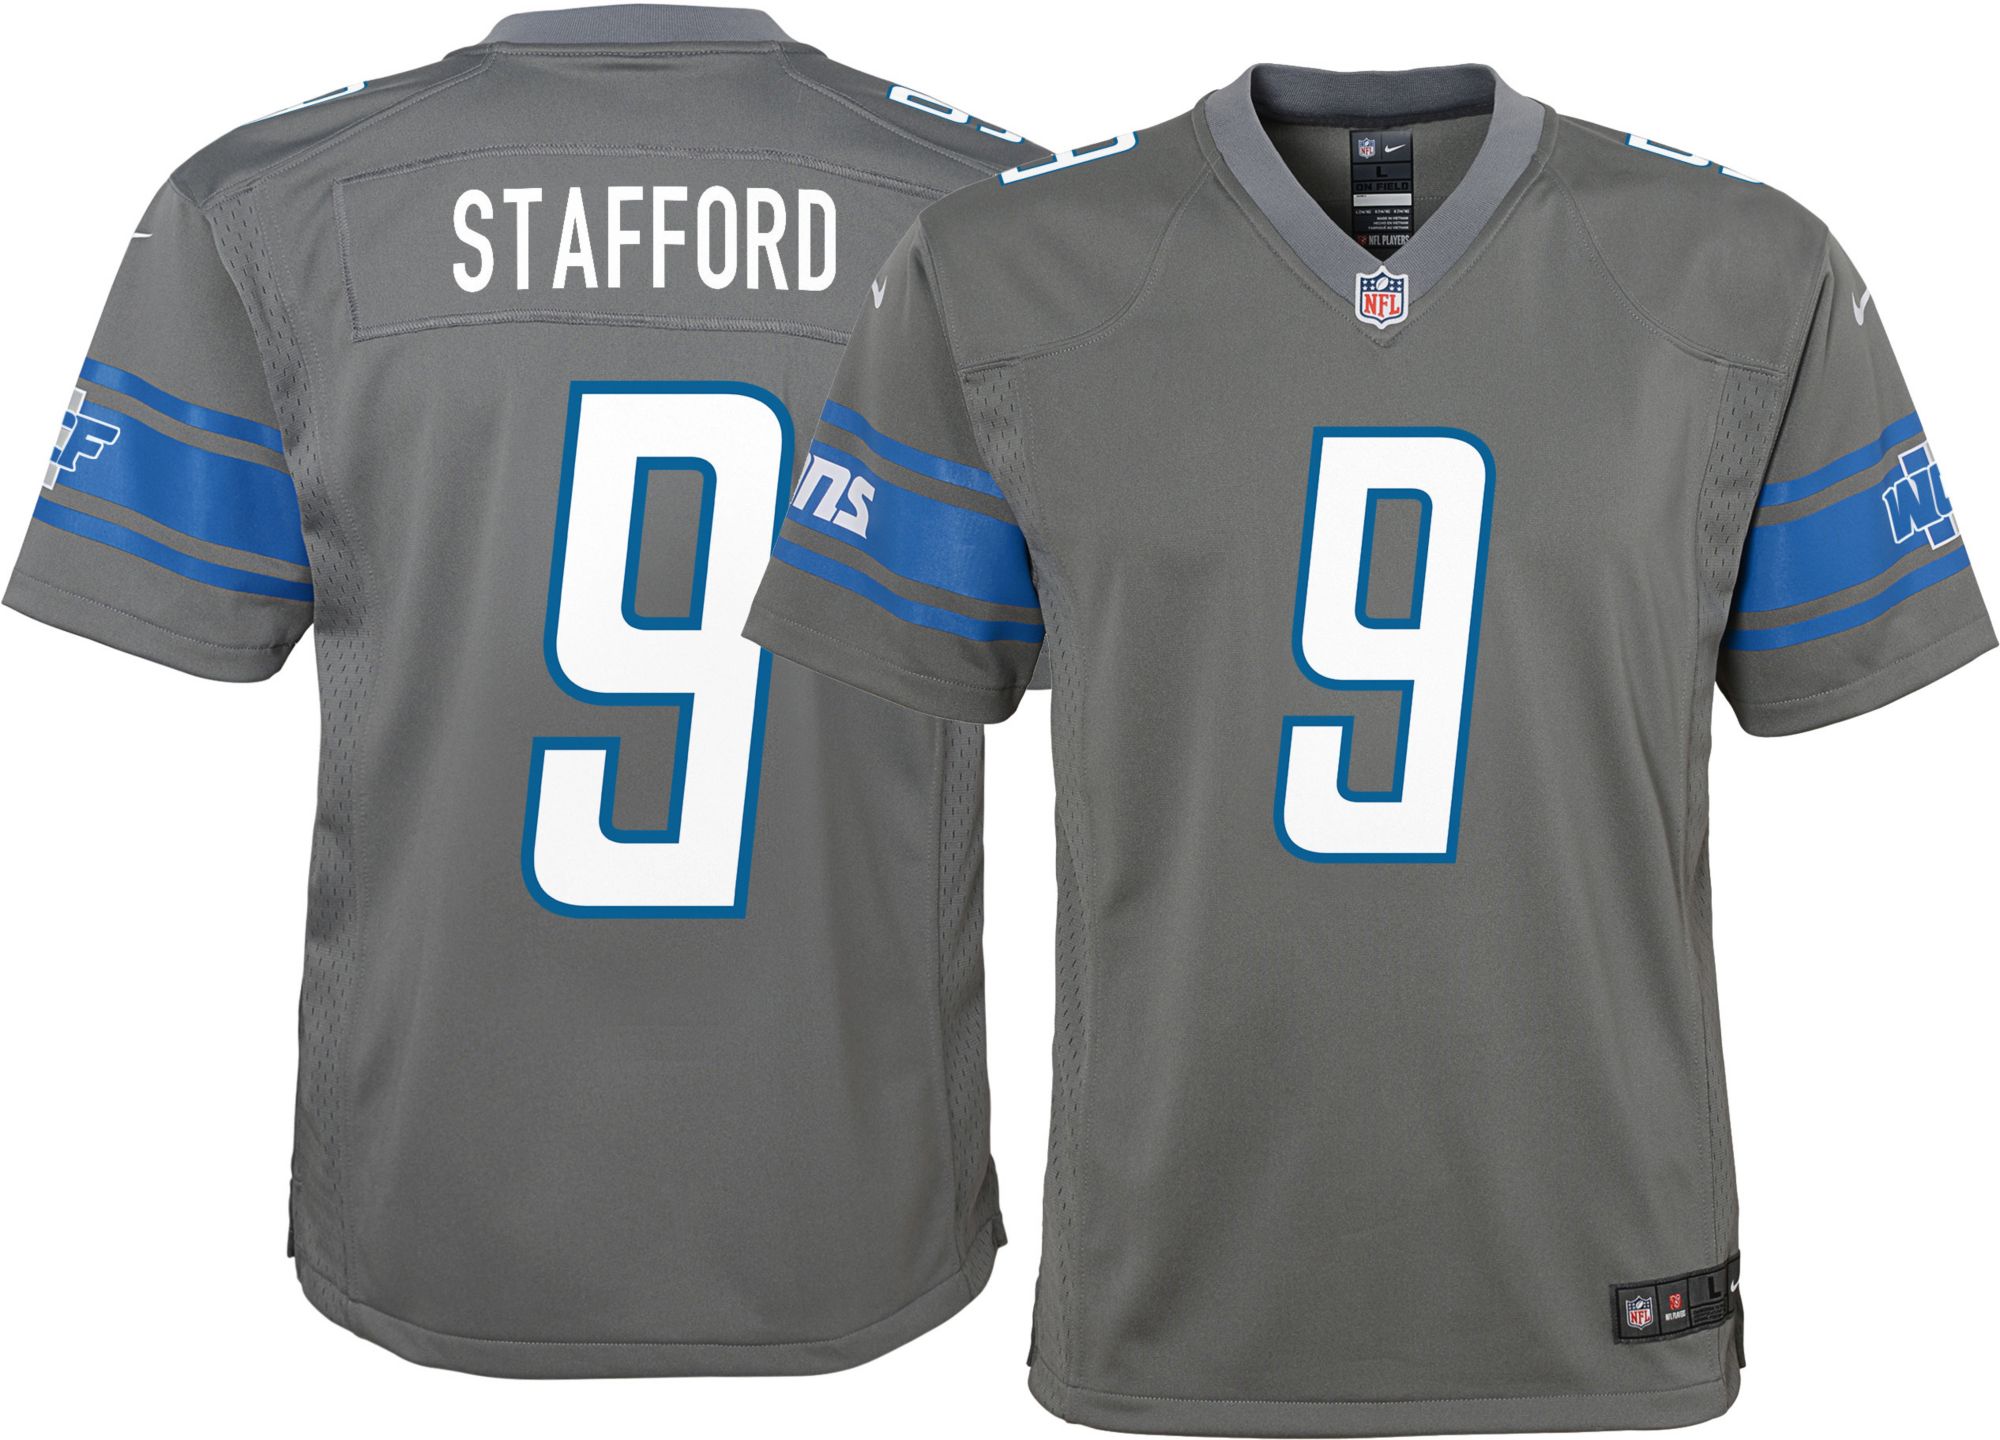 stafford color rush jersey